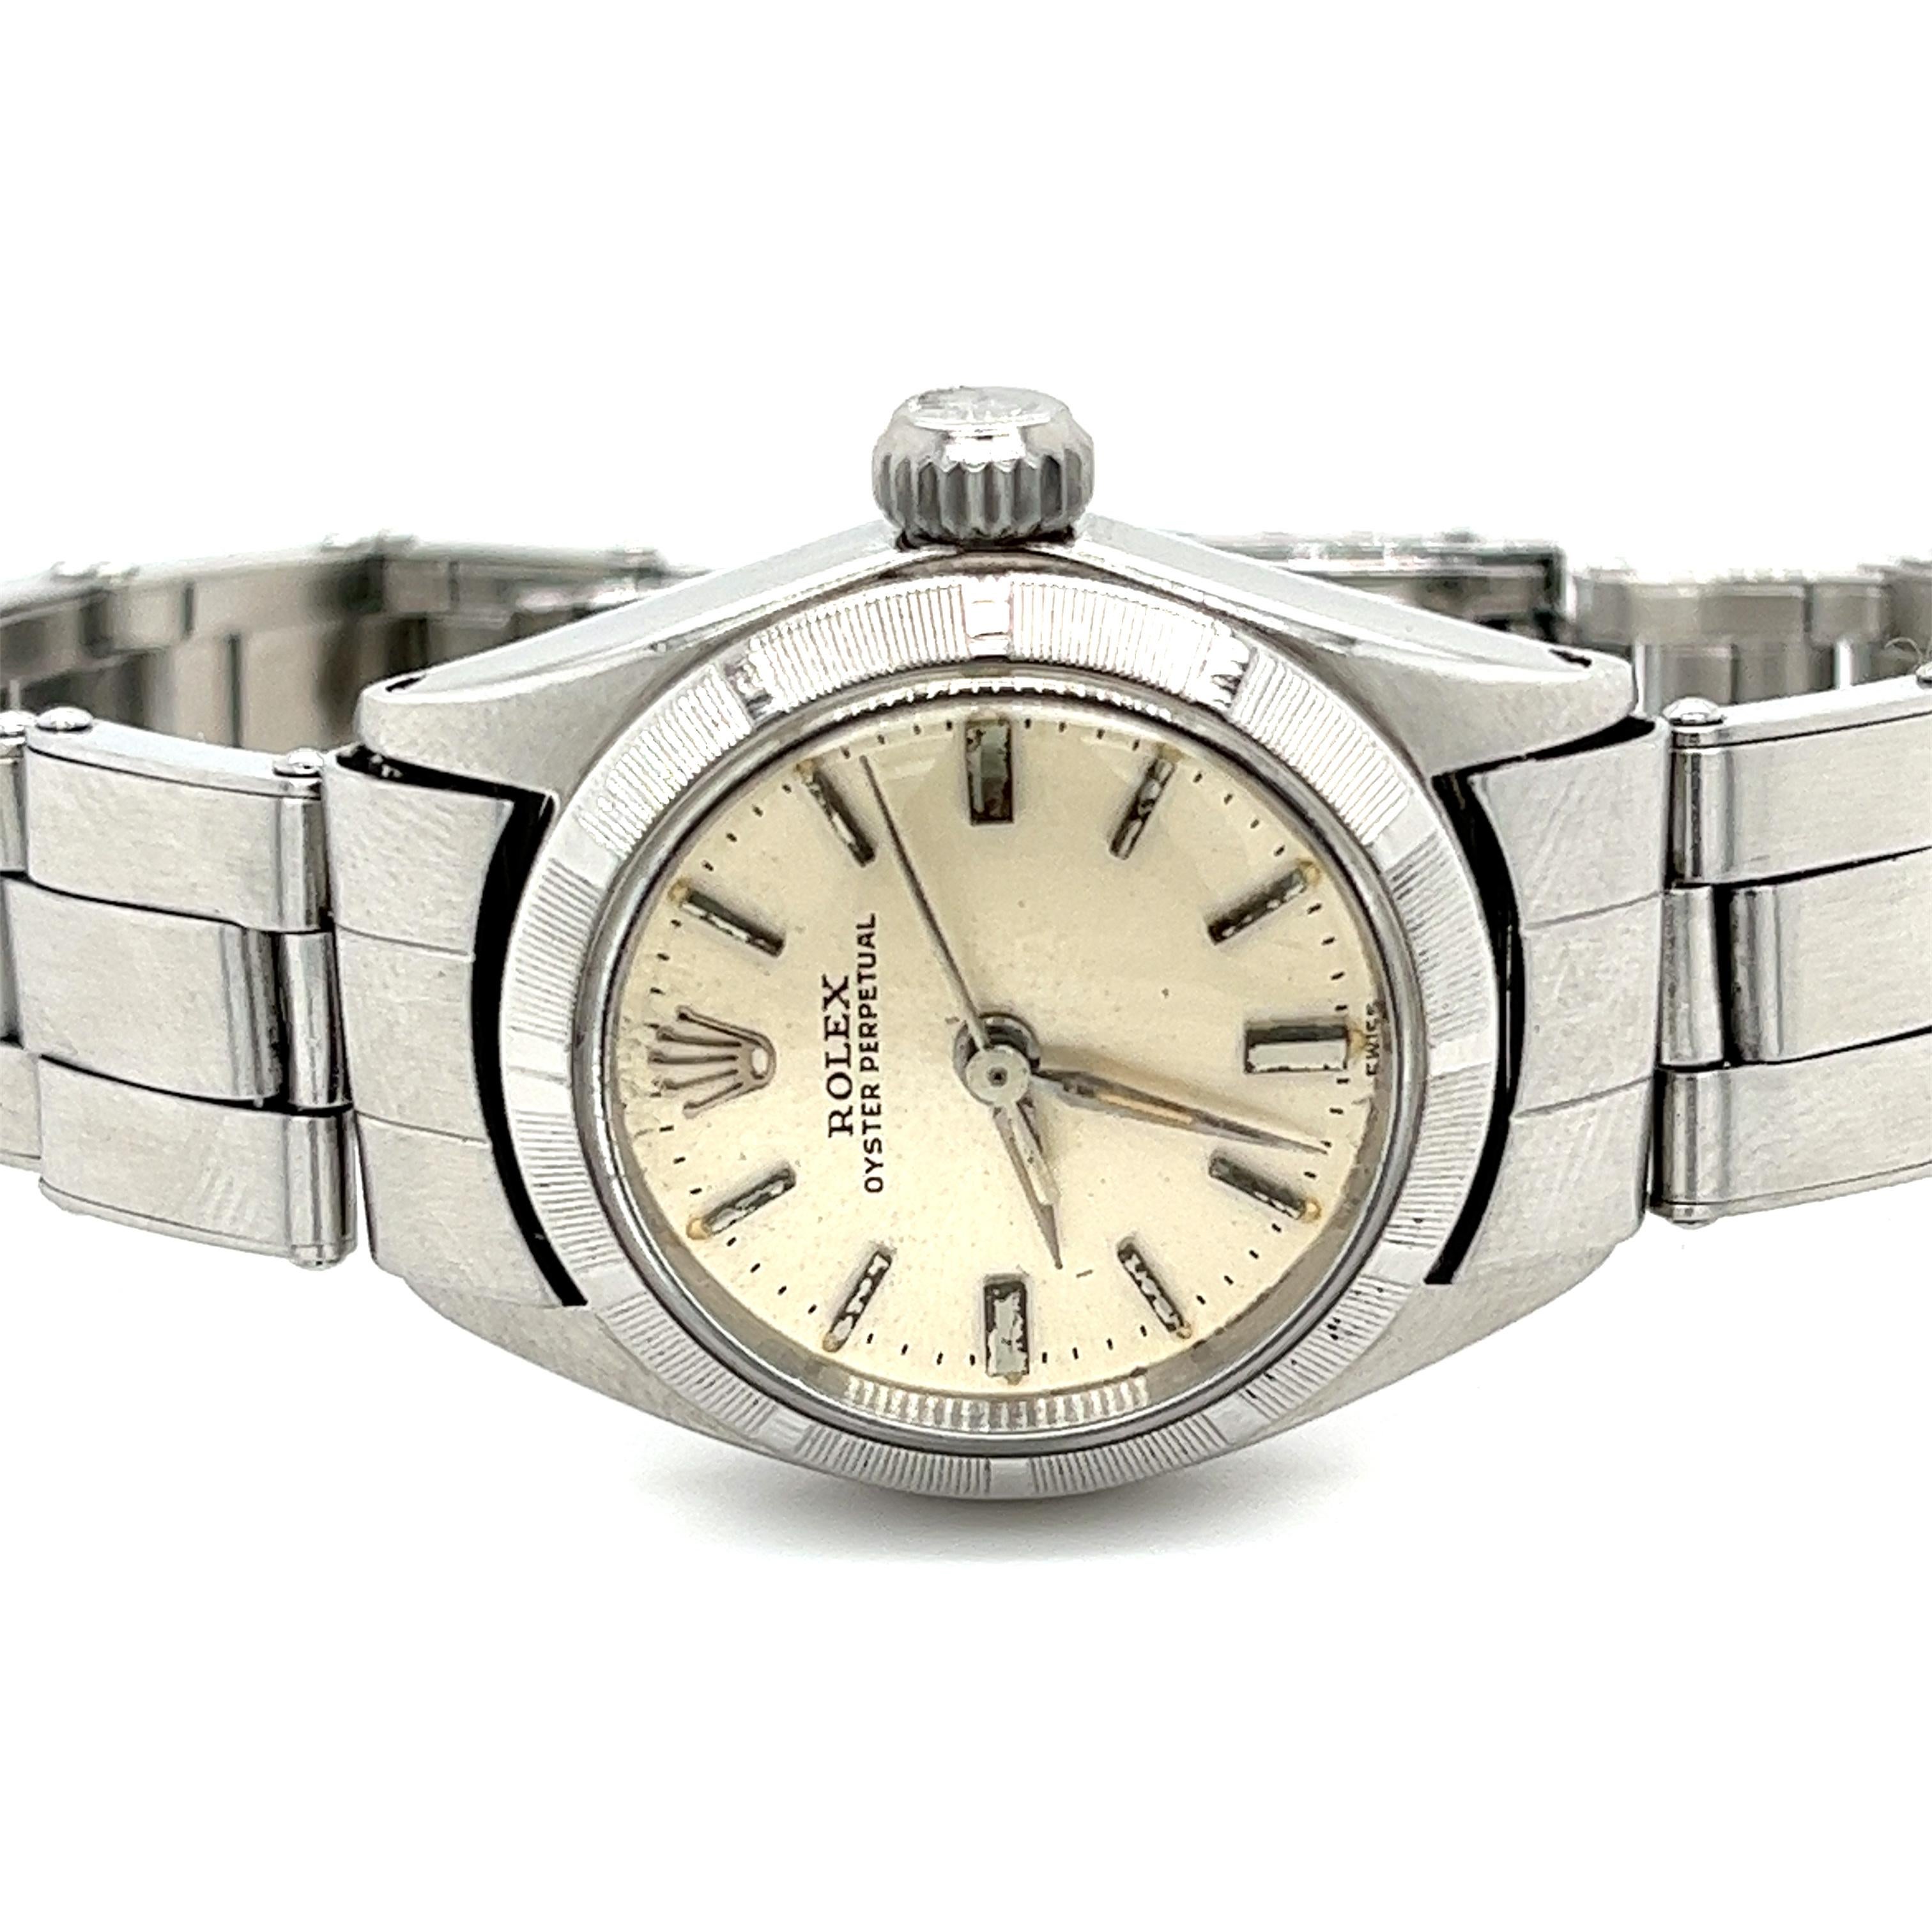 Women's Rolex 6623 Oyster Perpetual vintage ladies wrist watch in stainless steel. Featuring a vintage oyster bracelet, fold over clasp (deployment release), screw-down crown, and 26 jewels. 

A sleek, vintage timepiece for both the seasoned